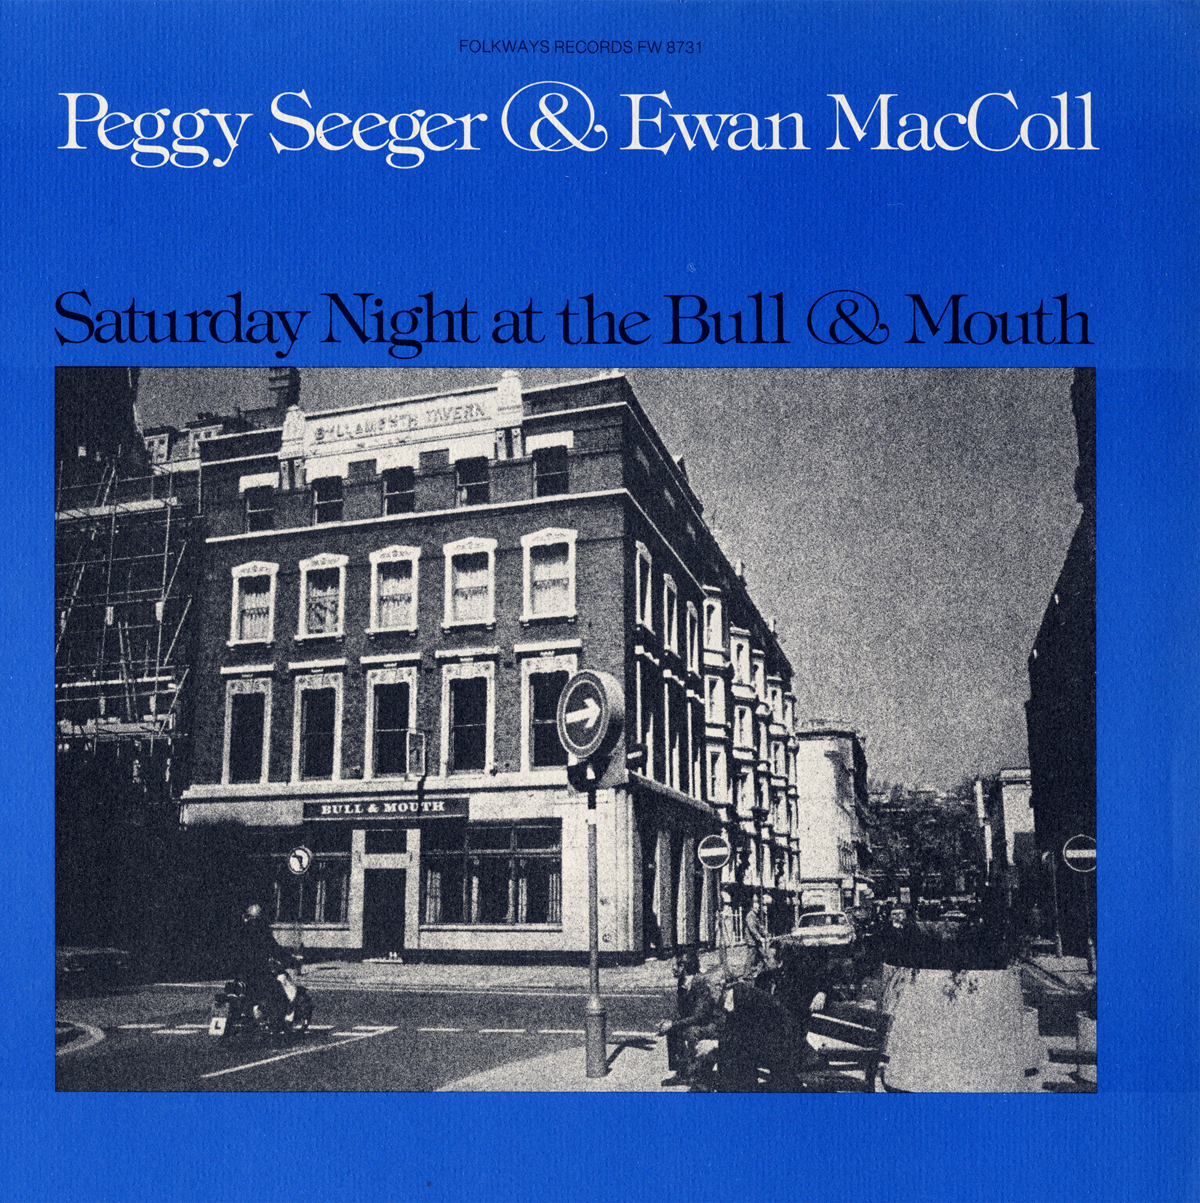 SATURDAY NIGHT AT THE BULL AND MOUTH